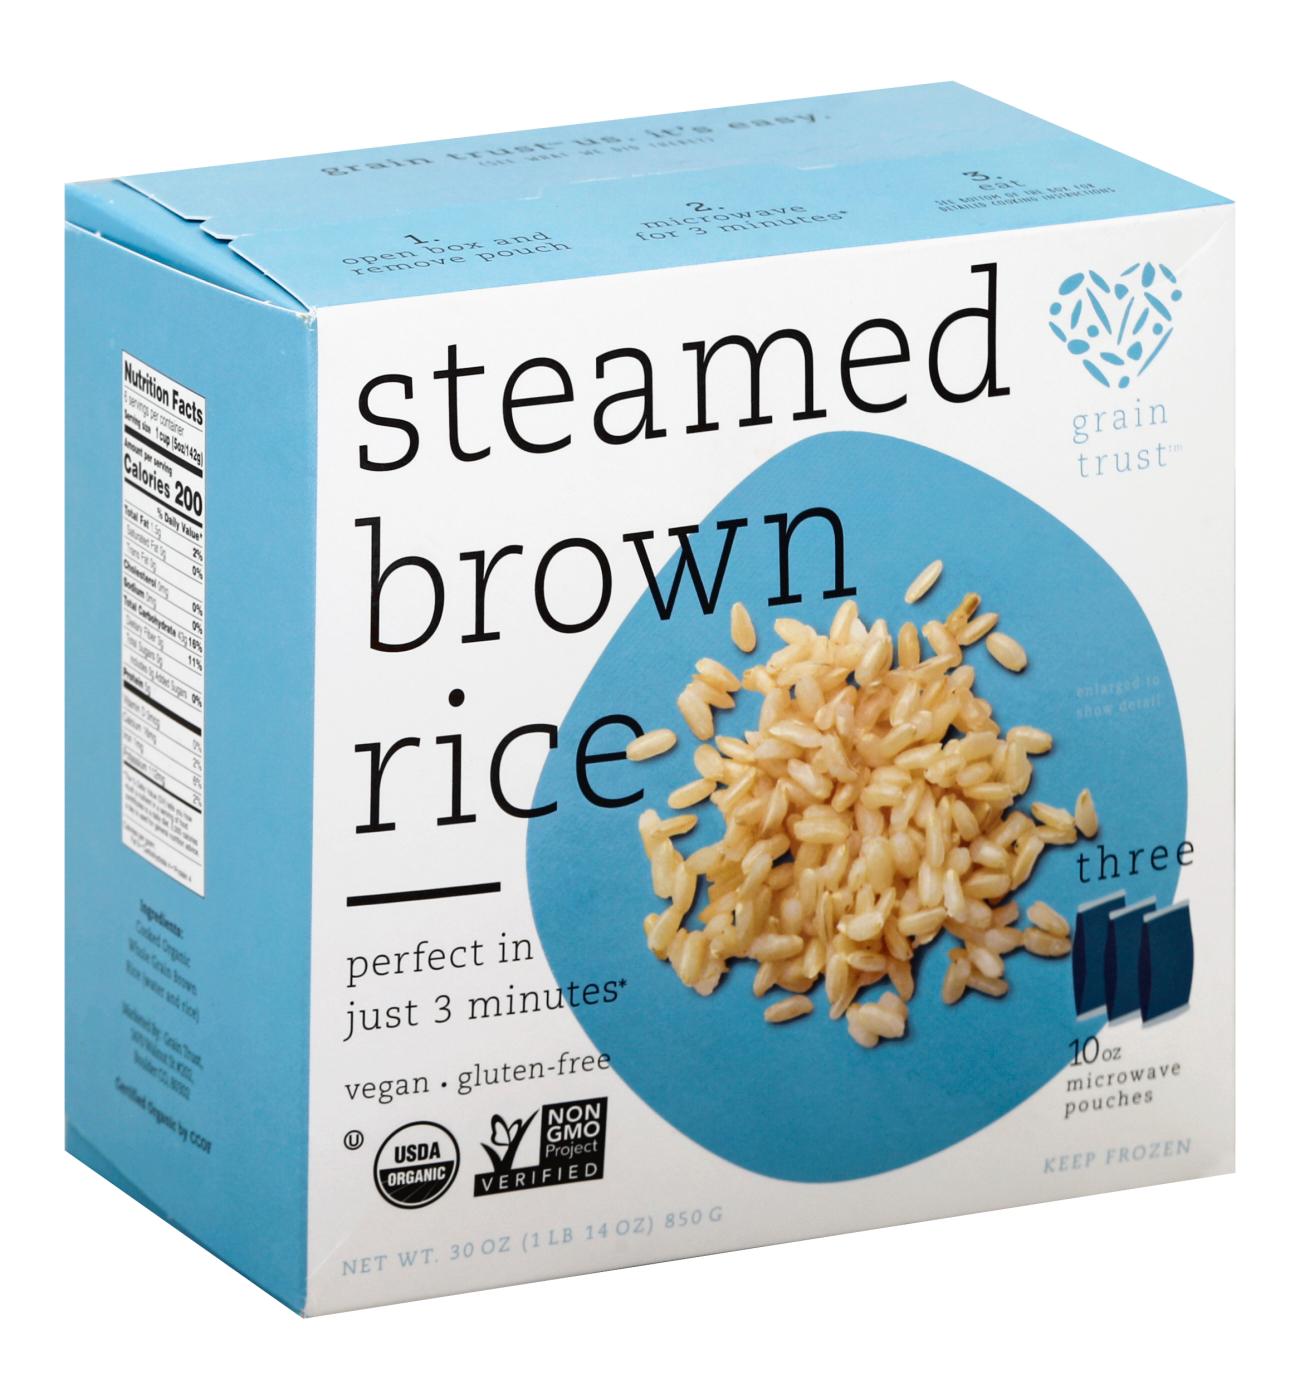 Grain Trust Steamed Brown Rice; image 2 of 2